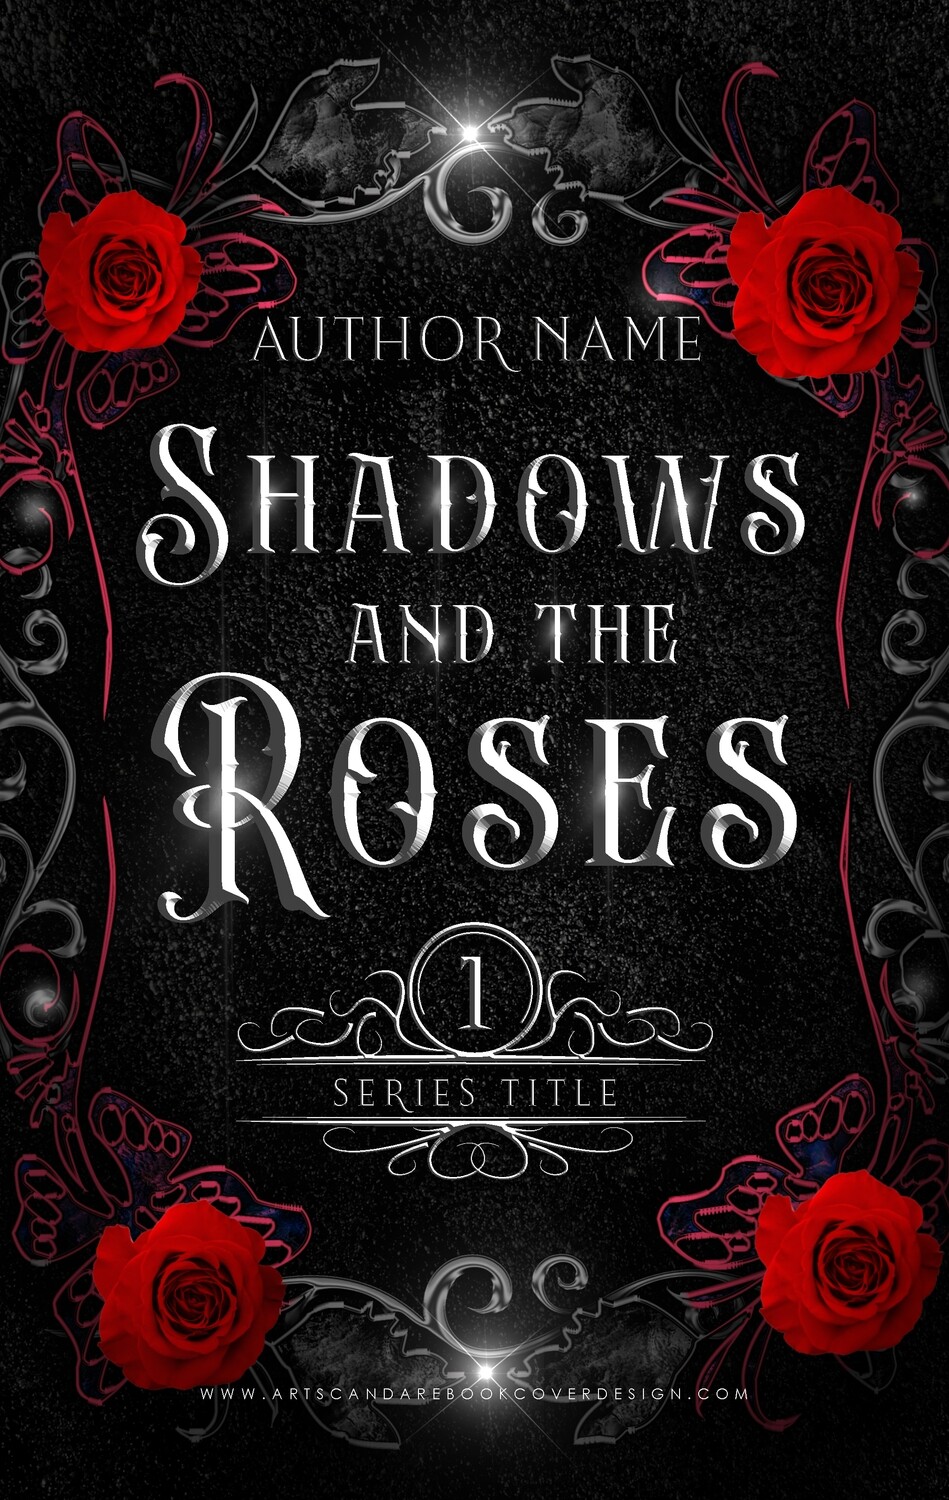 Ebook: Shadows and the Roses